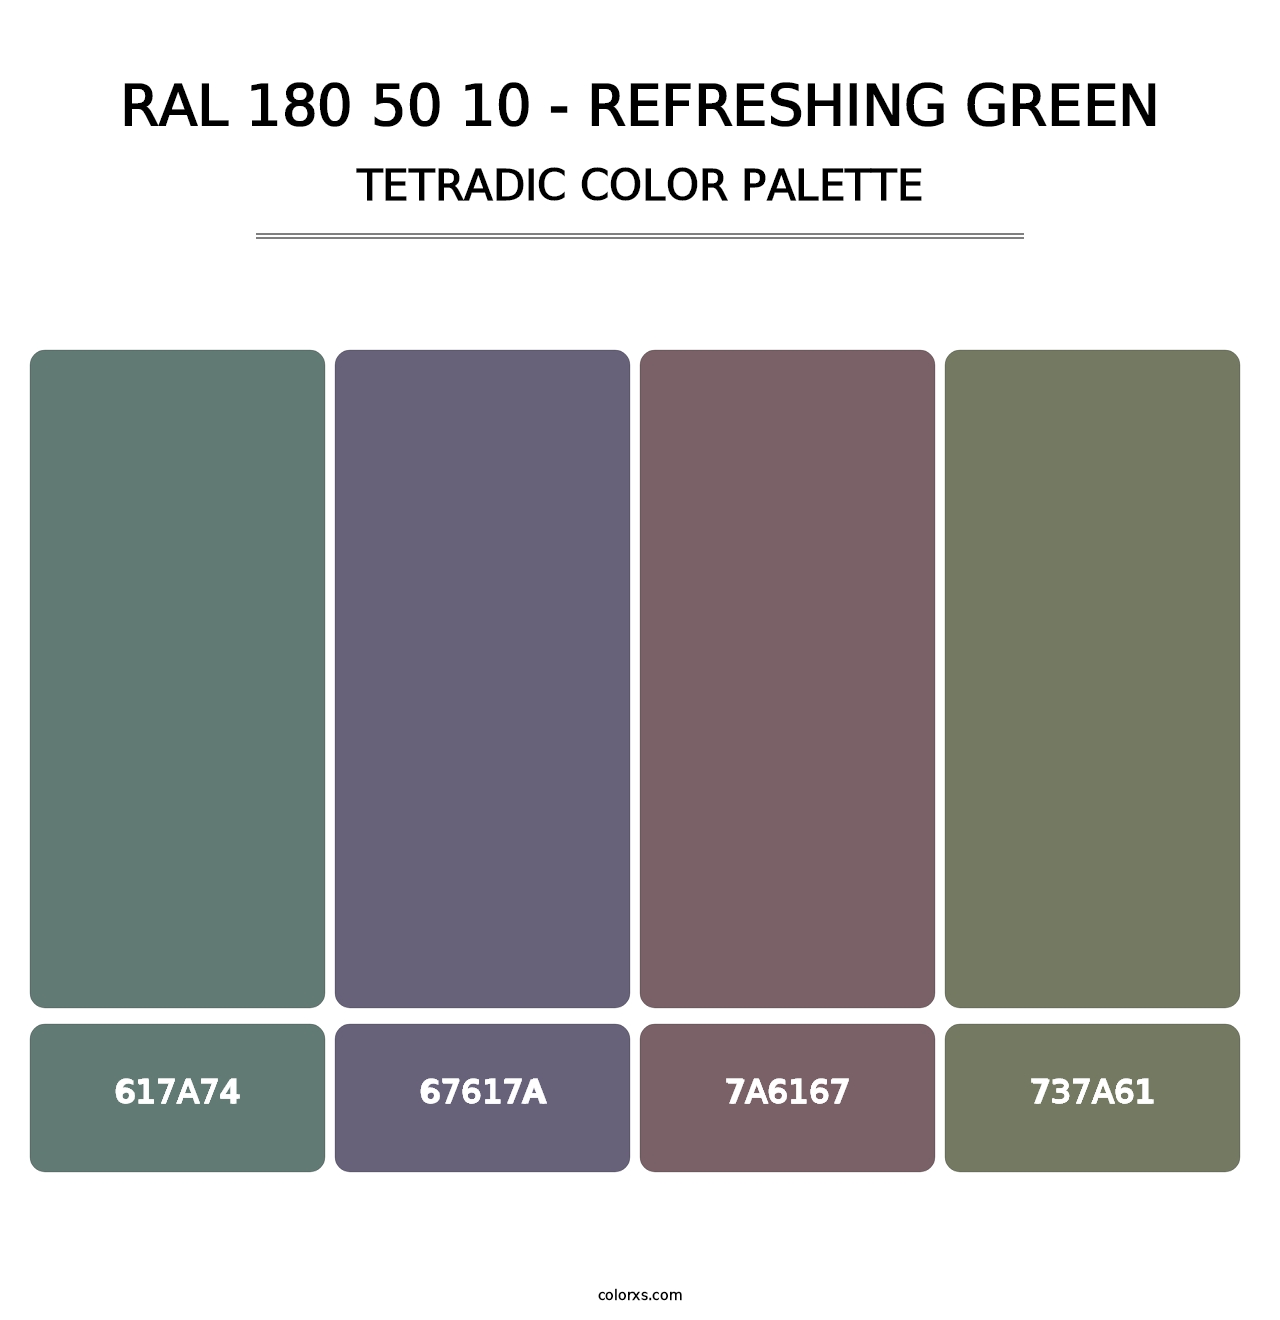 RAL 180 50 10 - Refreshing Green - Tetradic Color Palette